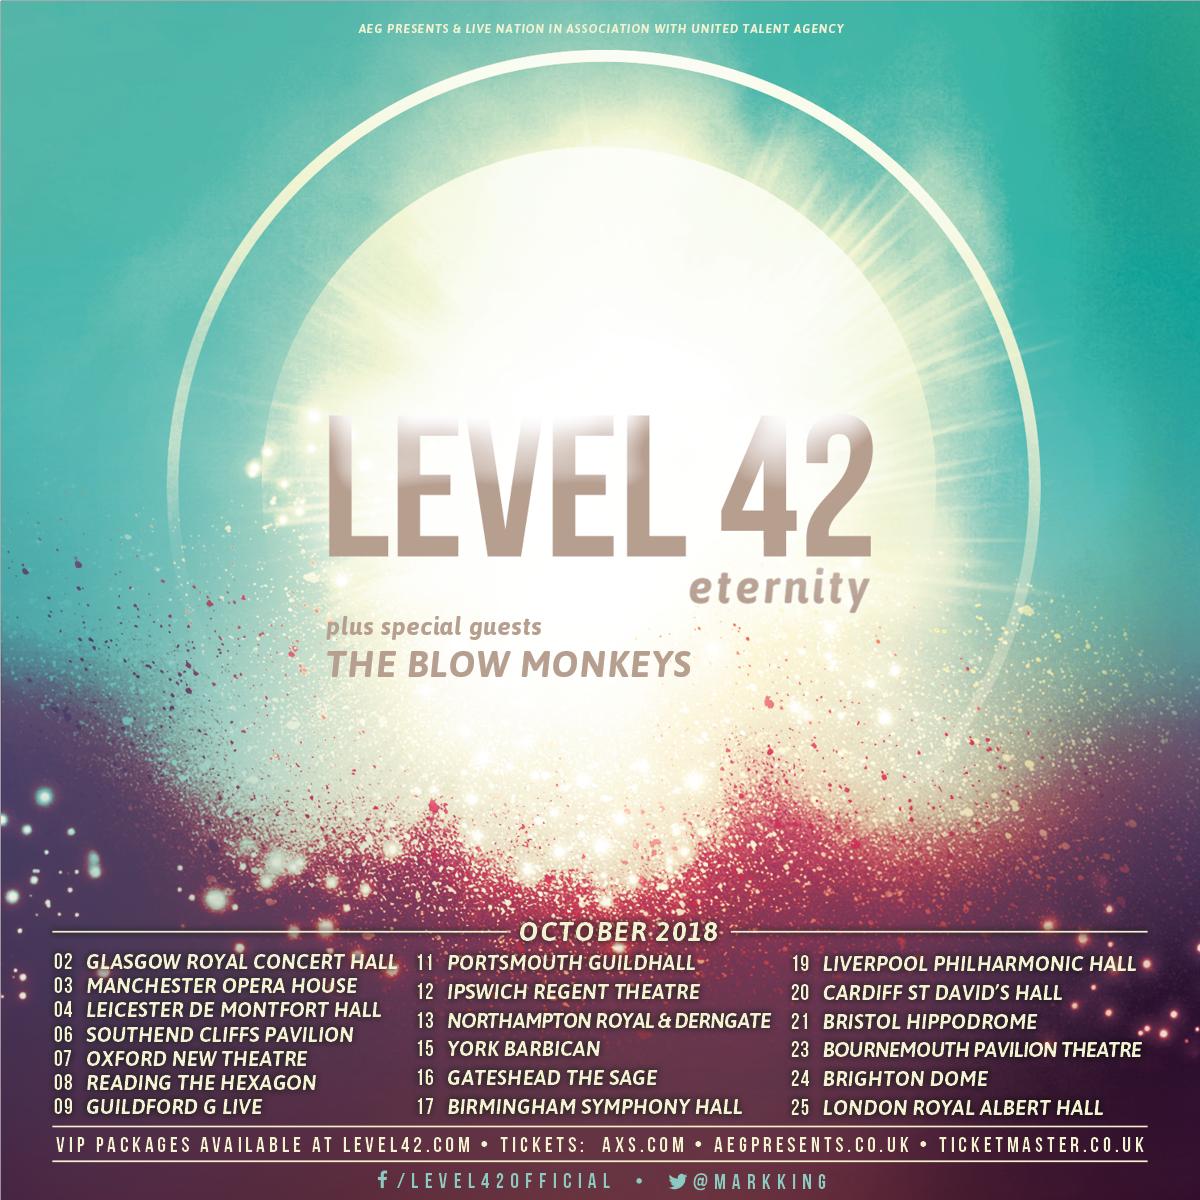 Level 42 release show dates for Ocelotshire